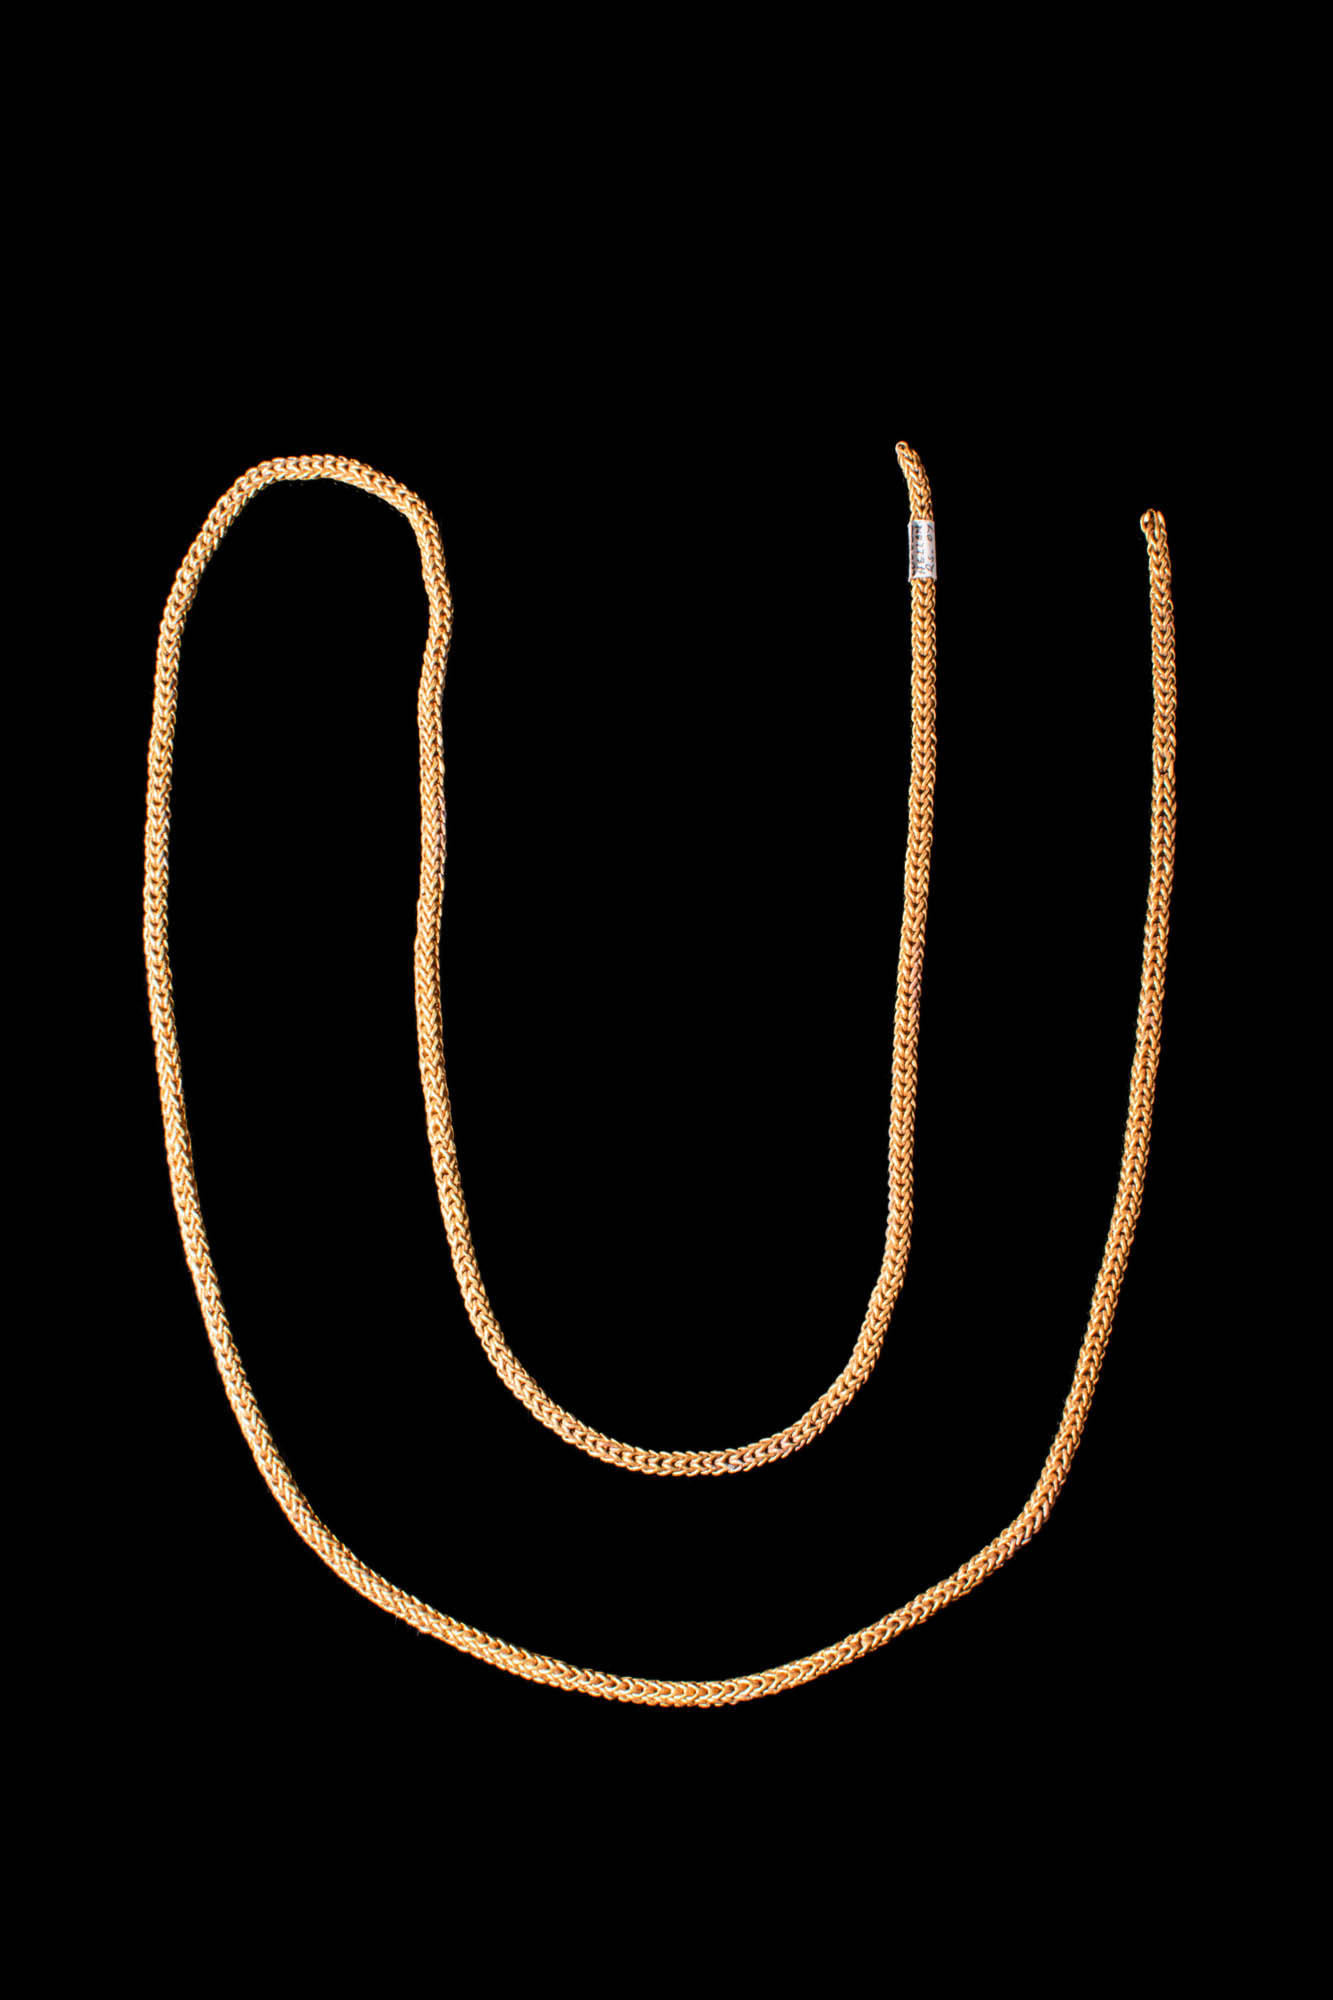 HEAVY HELLENISTIC GOLD CHAIN